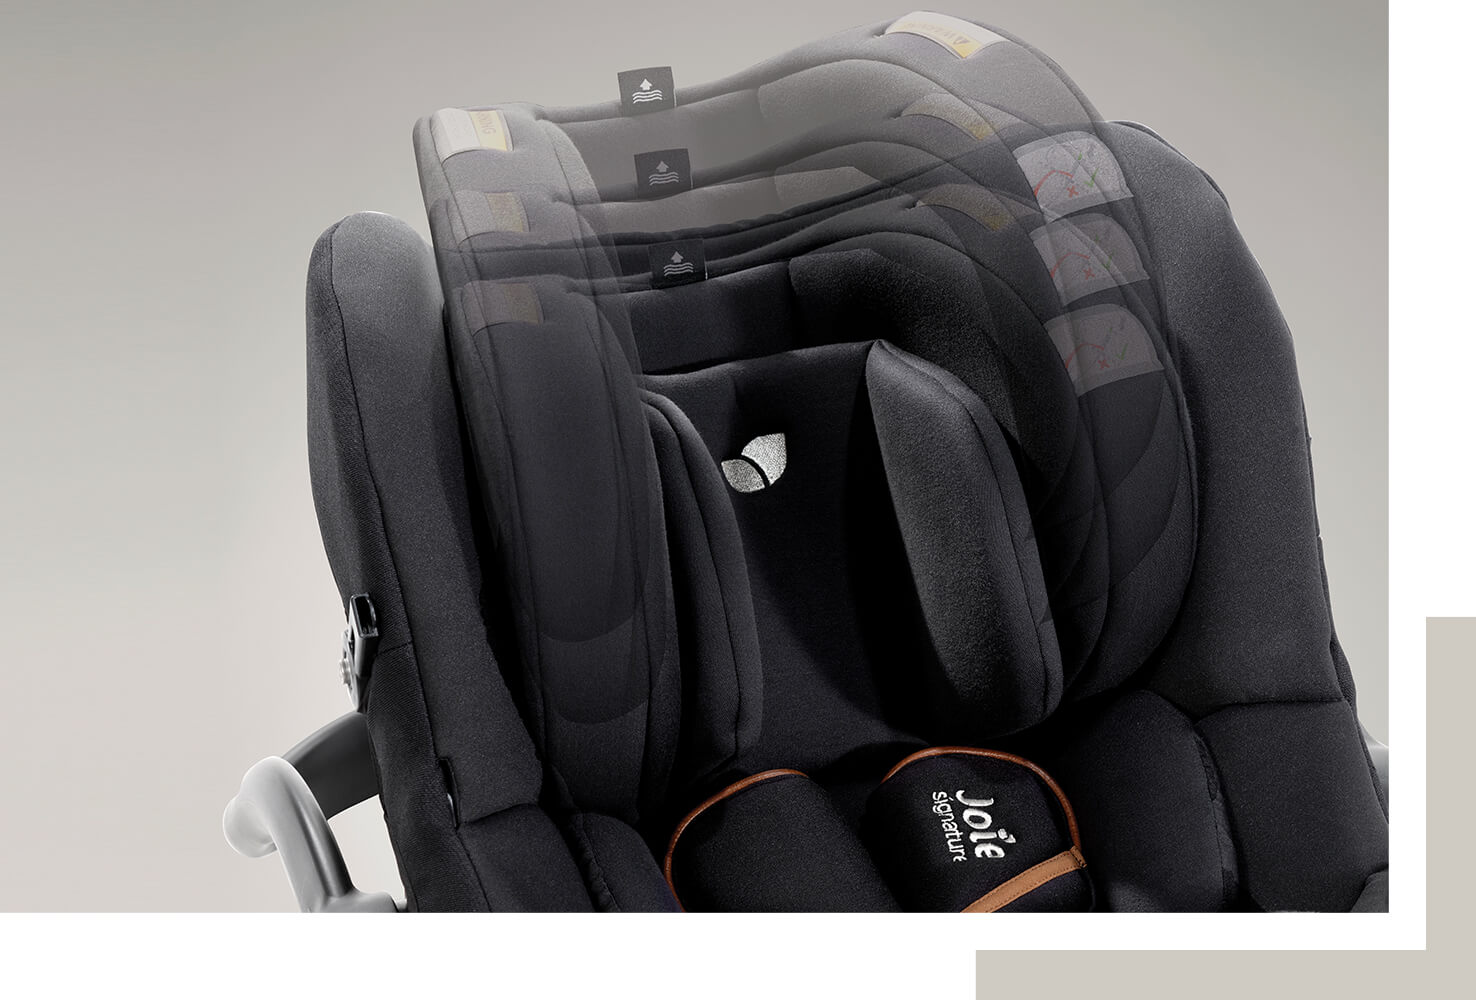 Black Joie I-Gemm infant car seat at an angle facing toward the right zoomed in on the infant headrest showing the multiple position headrest. 